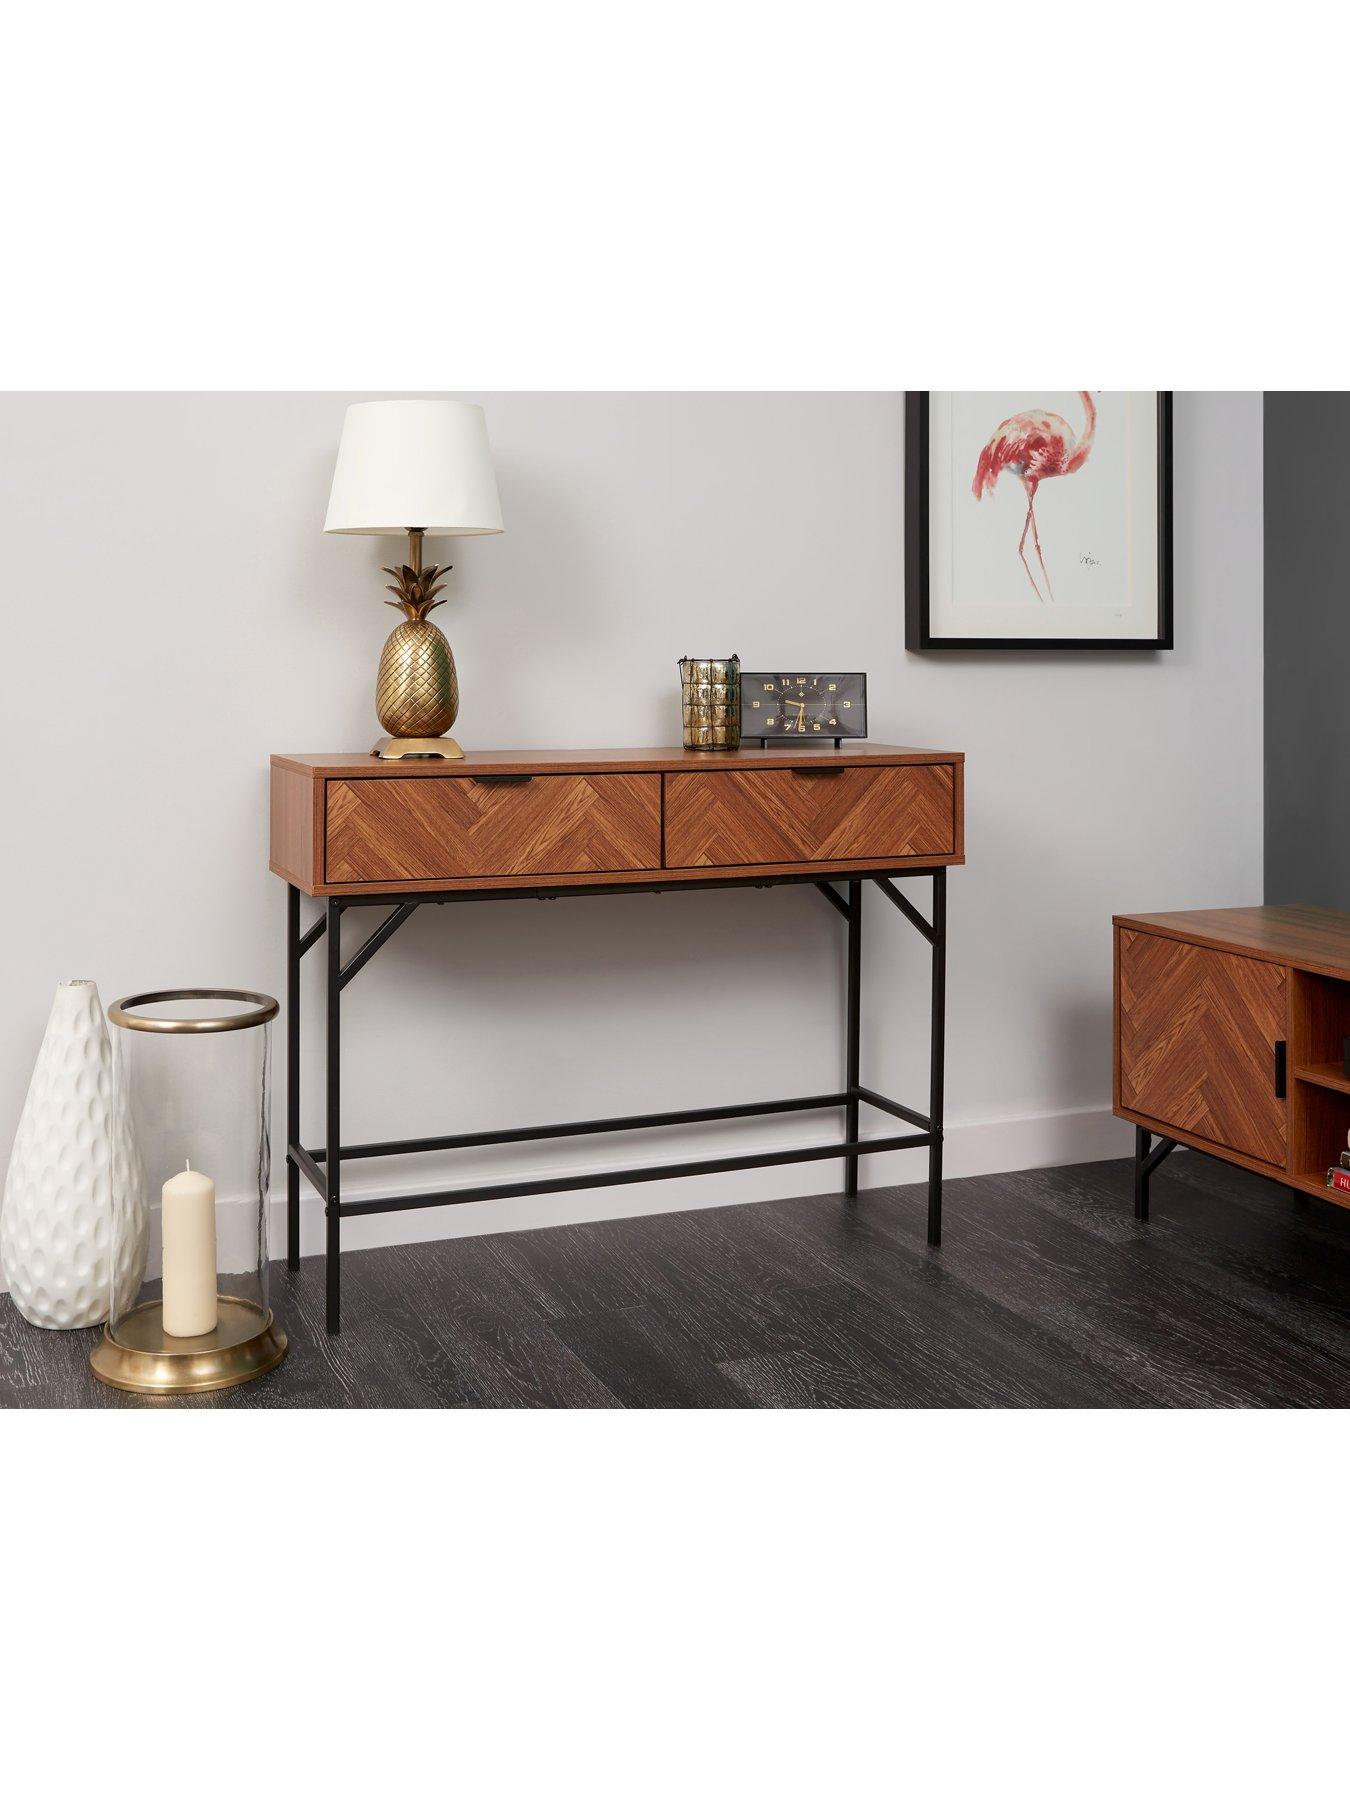 Lloyd Pascal Chevron 2 Drawer Console Table With Metal Legs